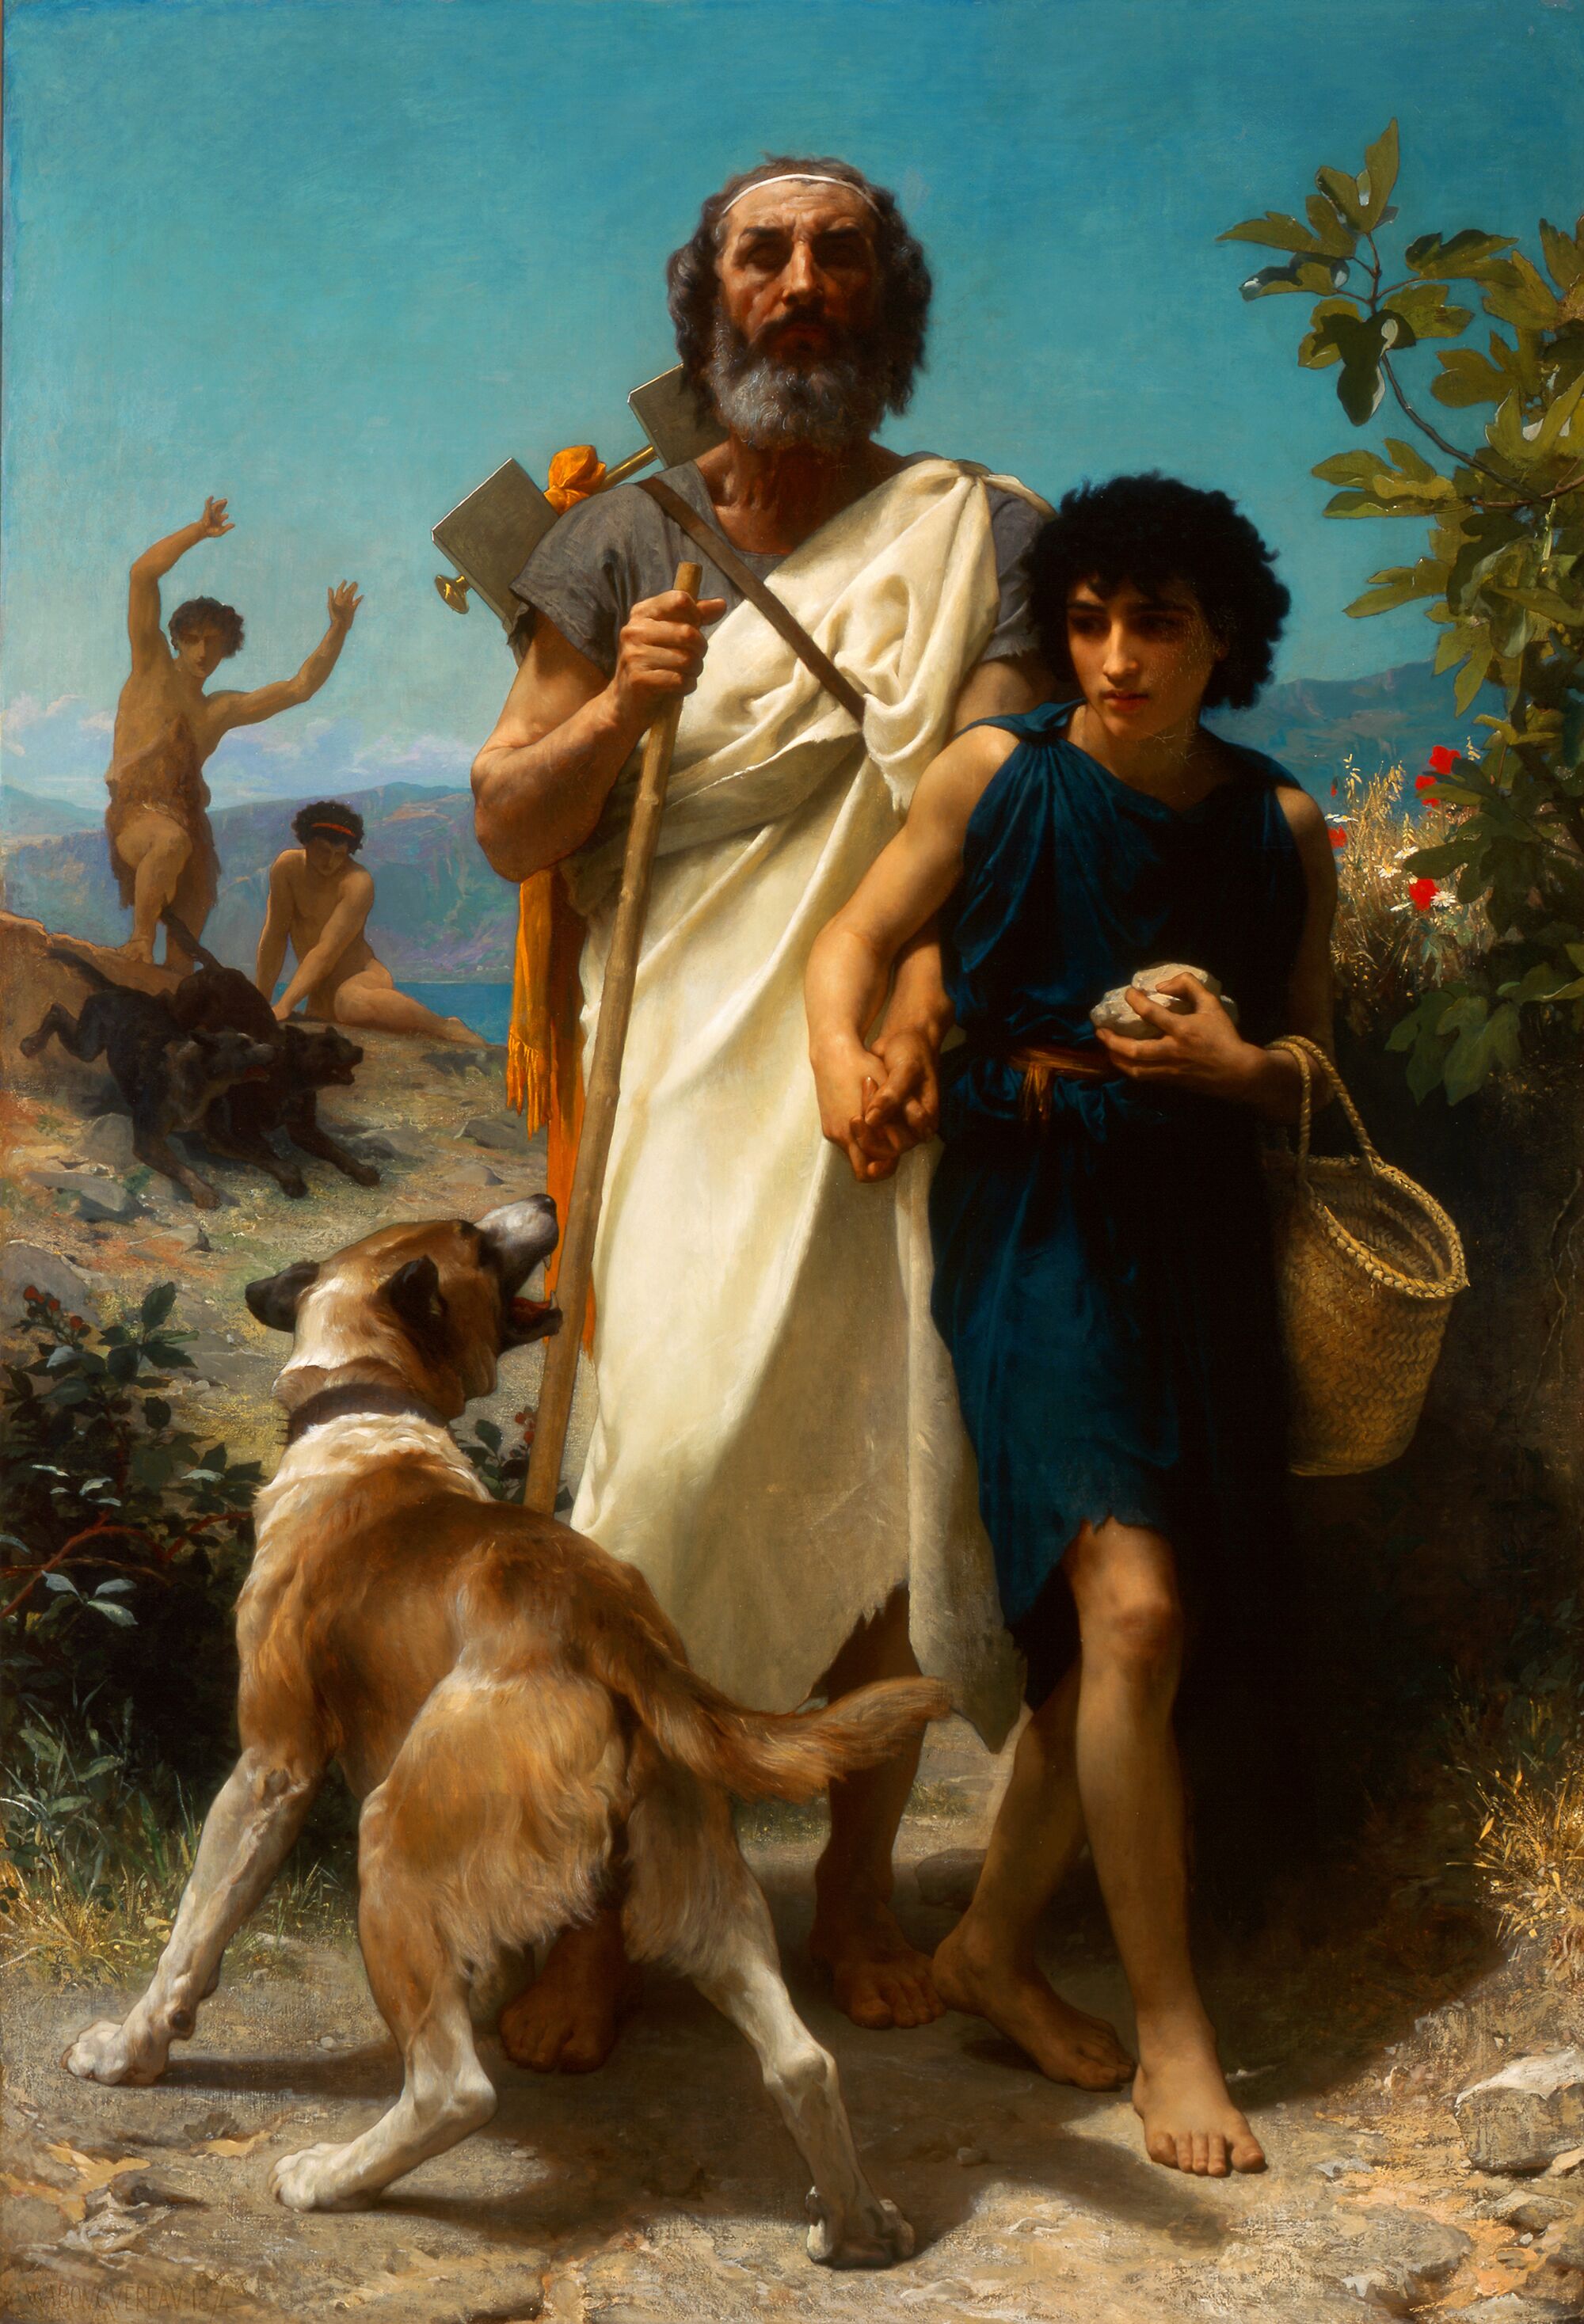 "Bouguereau & America" at the San Diego Museum of Art: "Homer and His Guide (Homère et son guide)," 1874 Oil on canvas